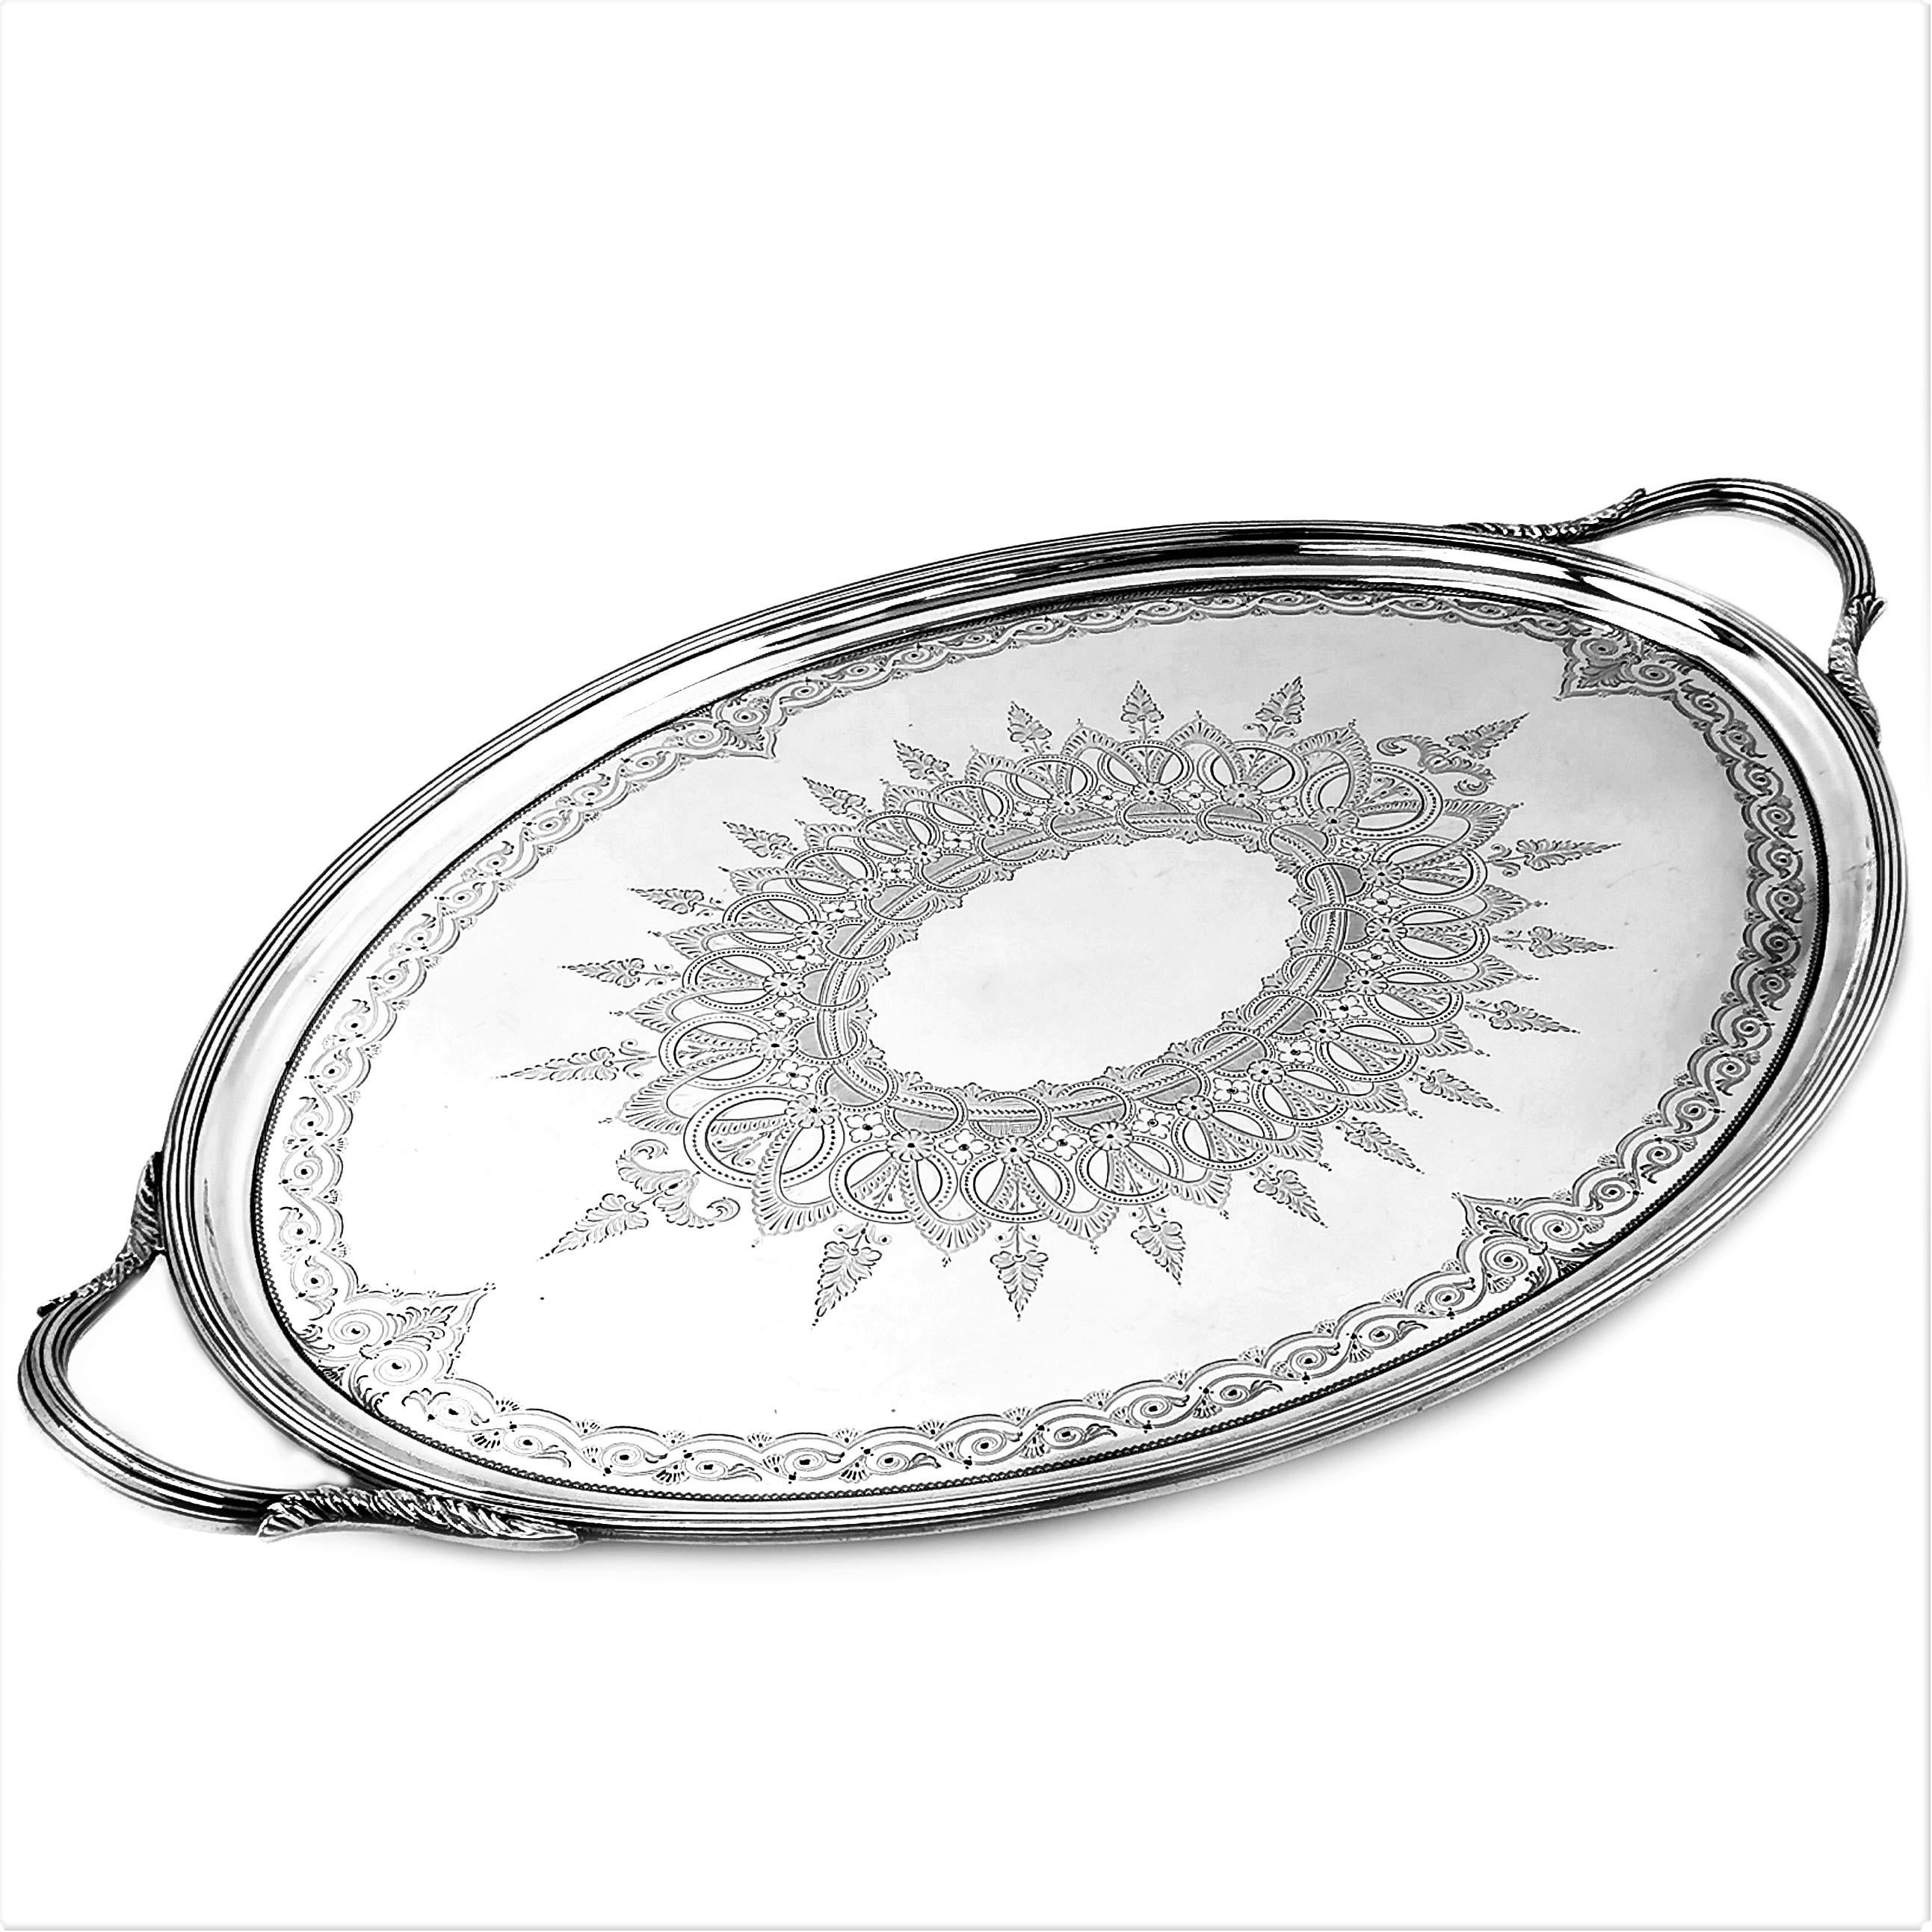 A beautiful Antique Victorian solid silver two handled Serving Tea Tray with a classic oval form. The Tray has two reeded handles decorated with stylized acanthus leaf designs. The interior of the Tray has a magnificent ornate engraved design in the